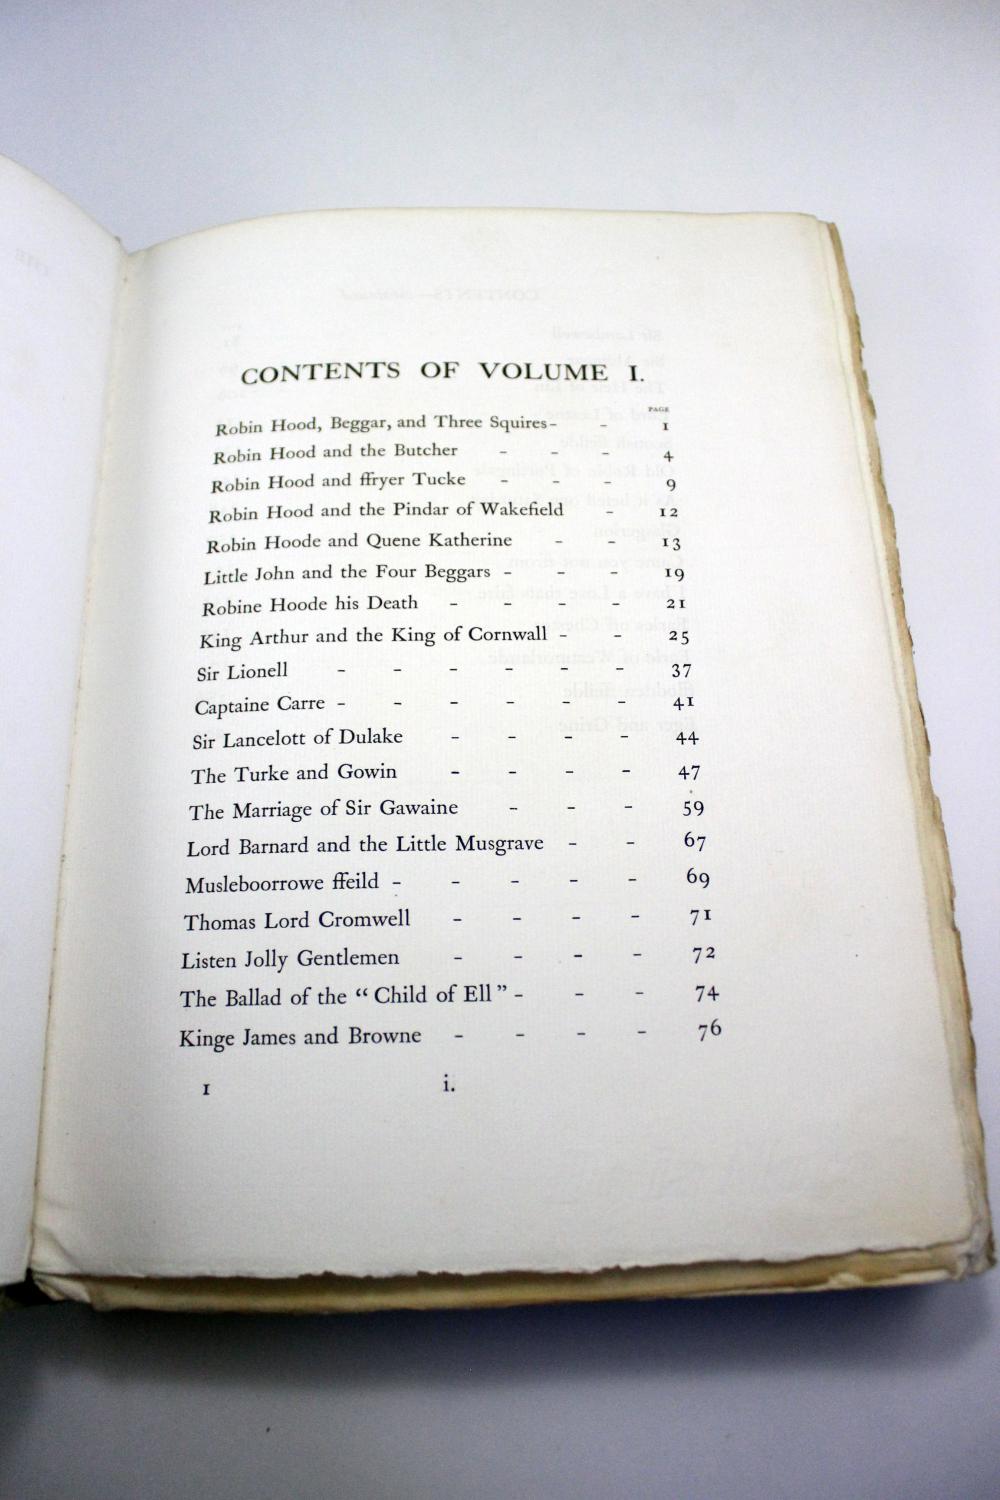 Buy The King's Library. The de la More Press Folios. IV. The Percy Folio of  Old English Ballads and Romances. Vol. II Book Online at Low Prices in  India